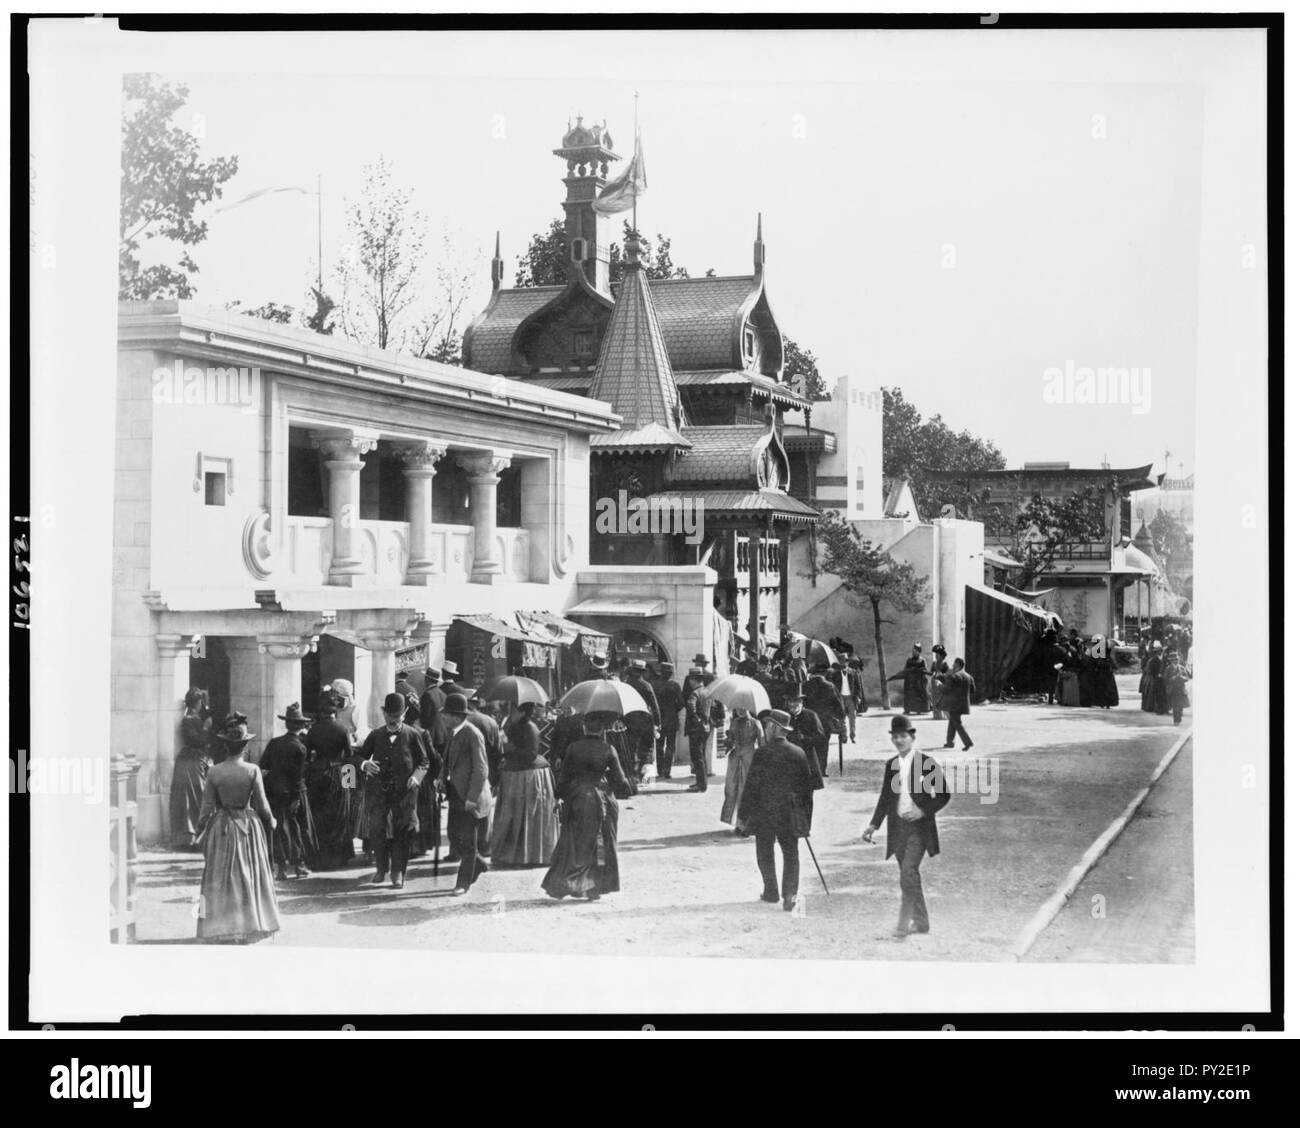 Byzantine house, Russian house, Arab house, and Japanese house in History of Habitation exhibit, Paris Exposition, 1889 Stock Photo